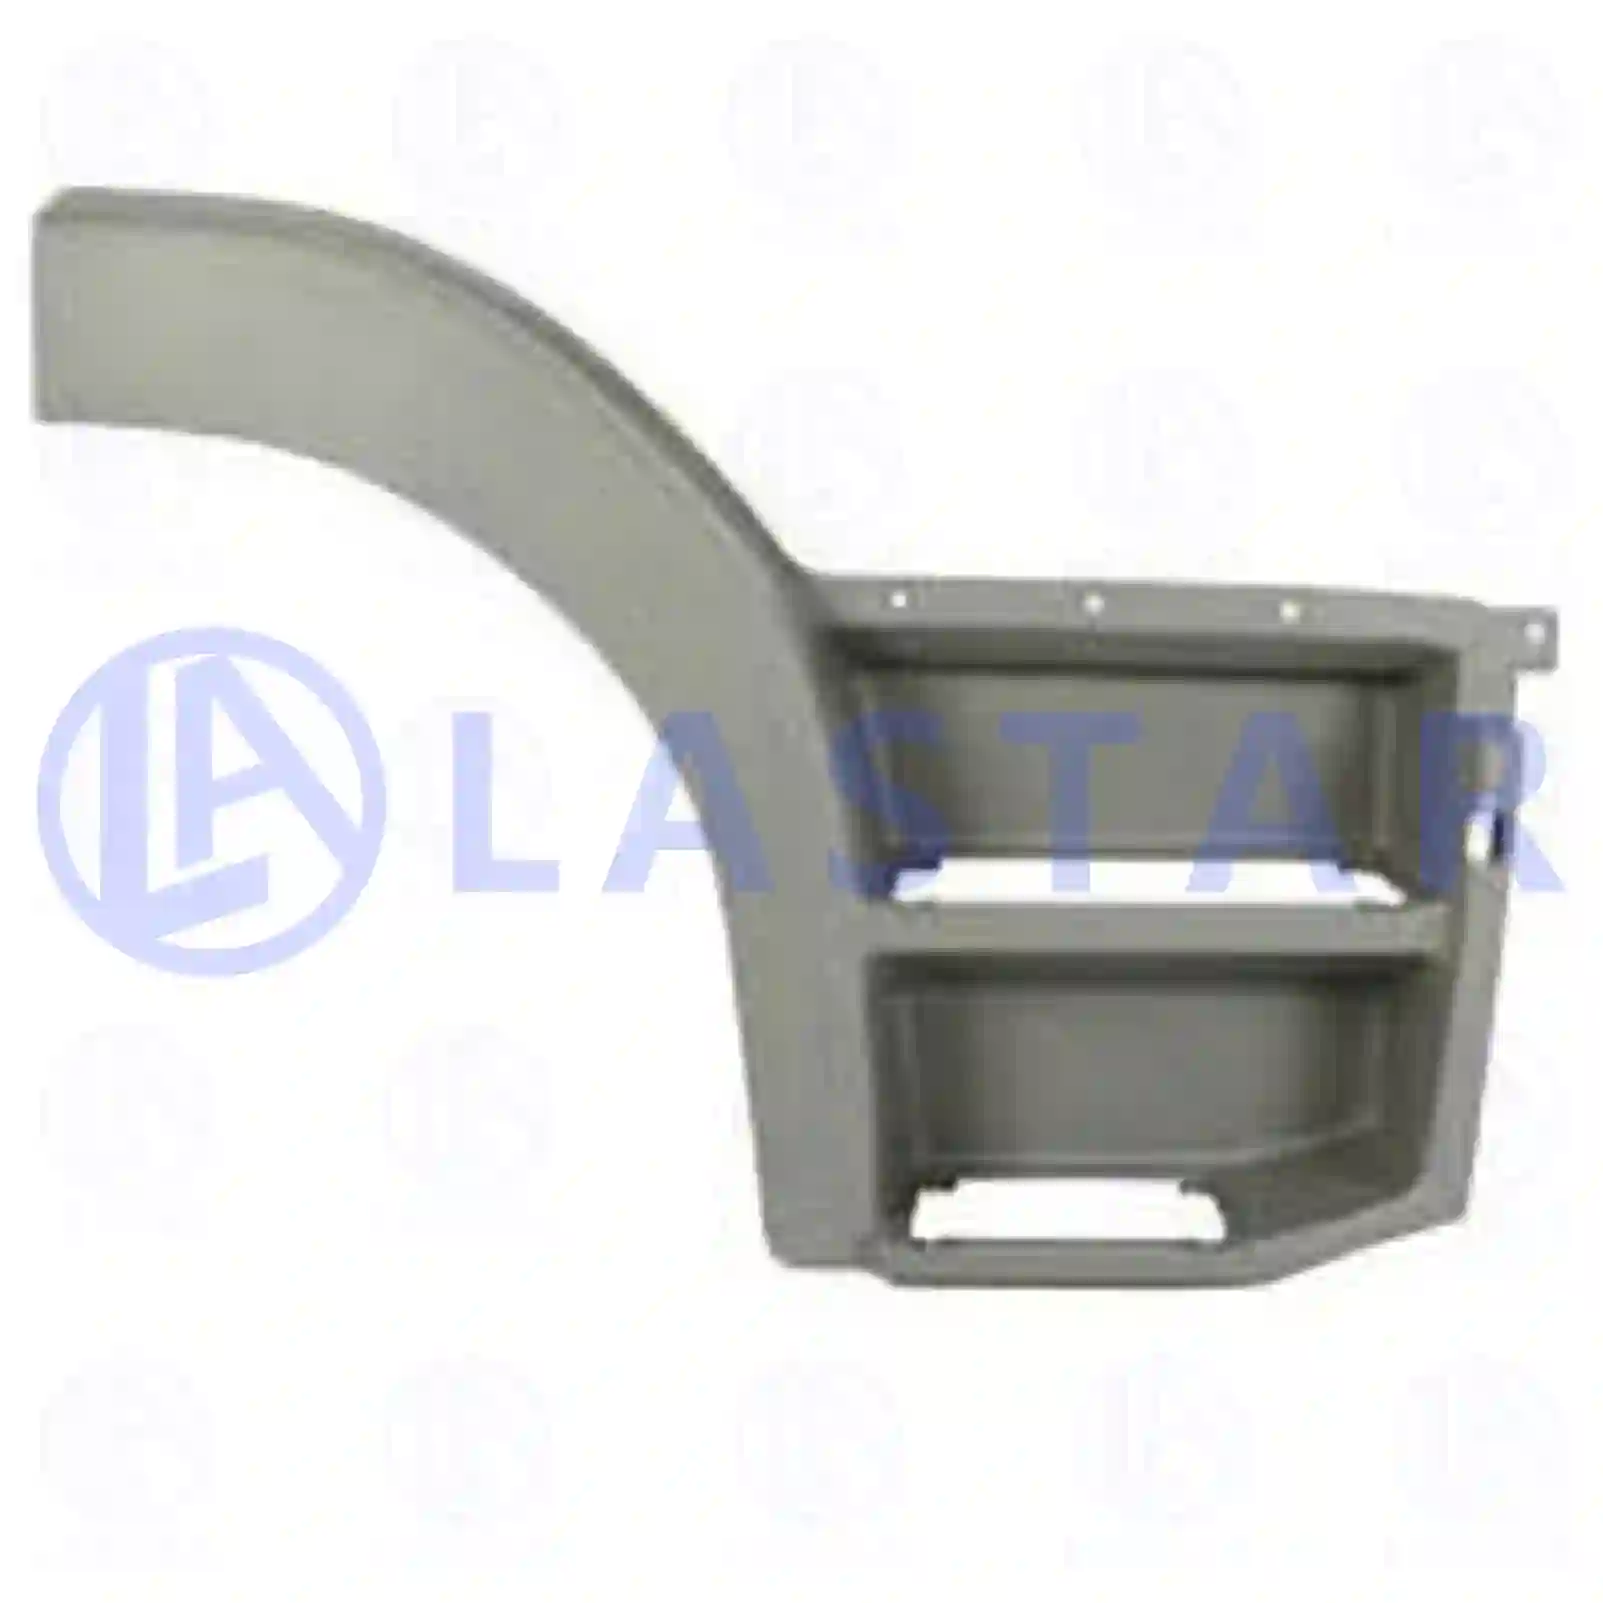 Step well case, right, 77718823, 9736663201, 97366 ||  77718823 Lastar Spare Part | Truck Spare Parts, Auotomotive Spare Parts Step well case, right, 77718823, 9736663201, 97366 ||  77718823 Lastar Spare Part | Truck Spare Parts, Auotomotive Spare Parts